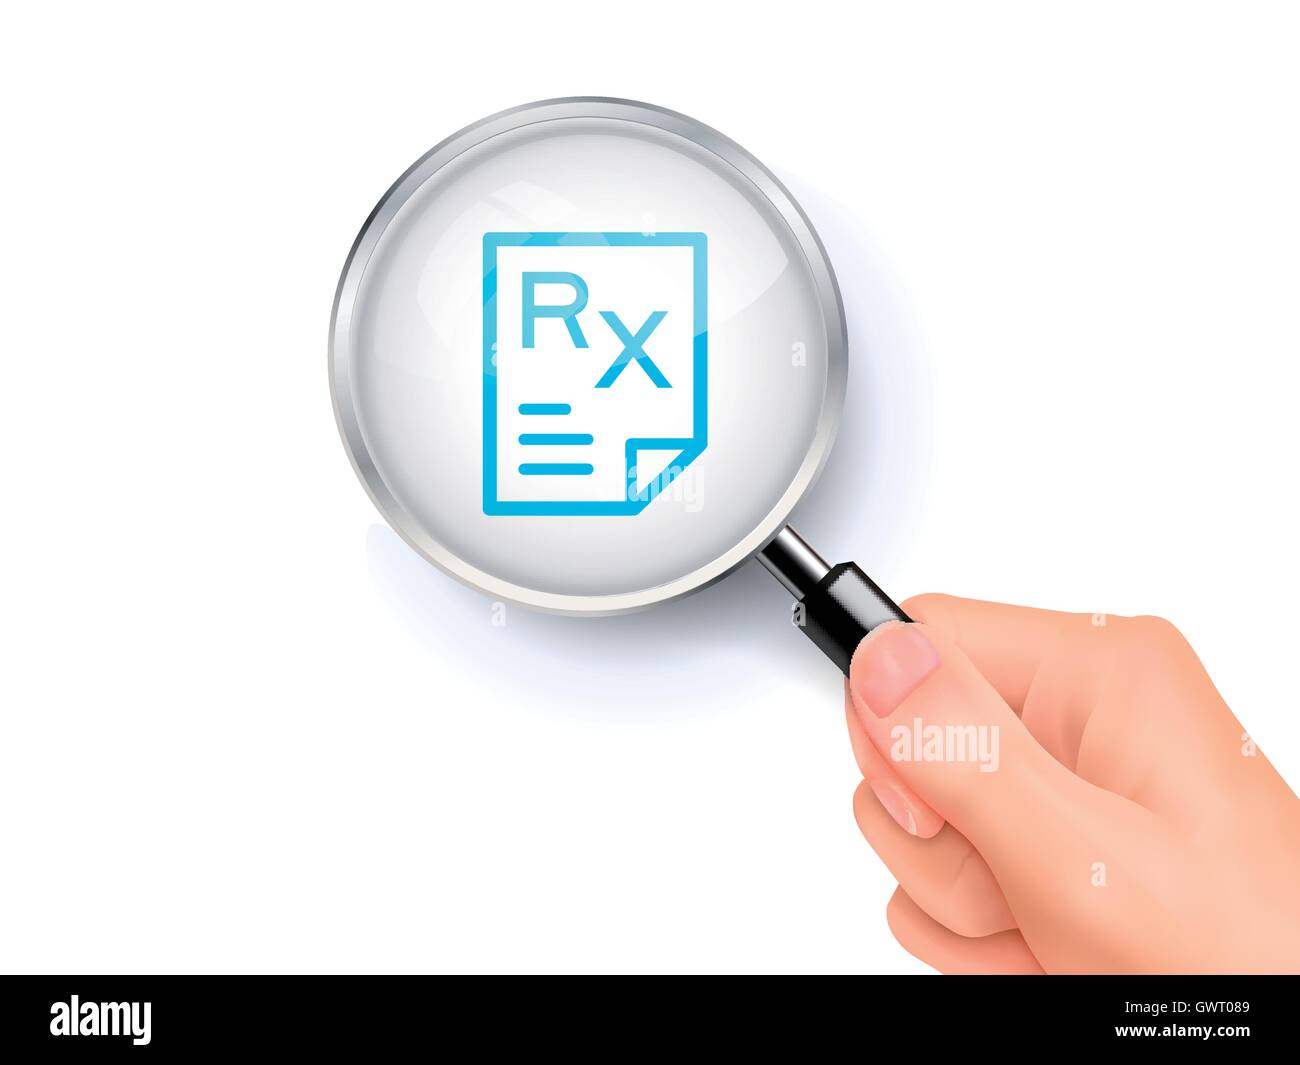 Prescription icon sign showing through by magnifying glass held by hand. 3D illustration. Stock Vector